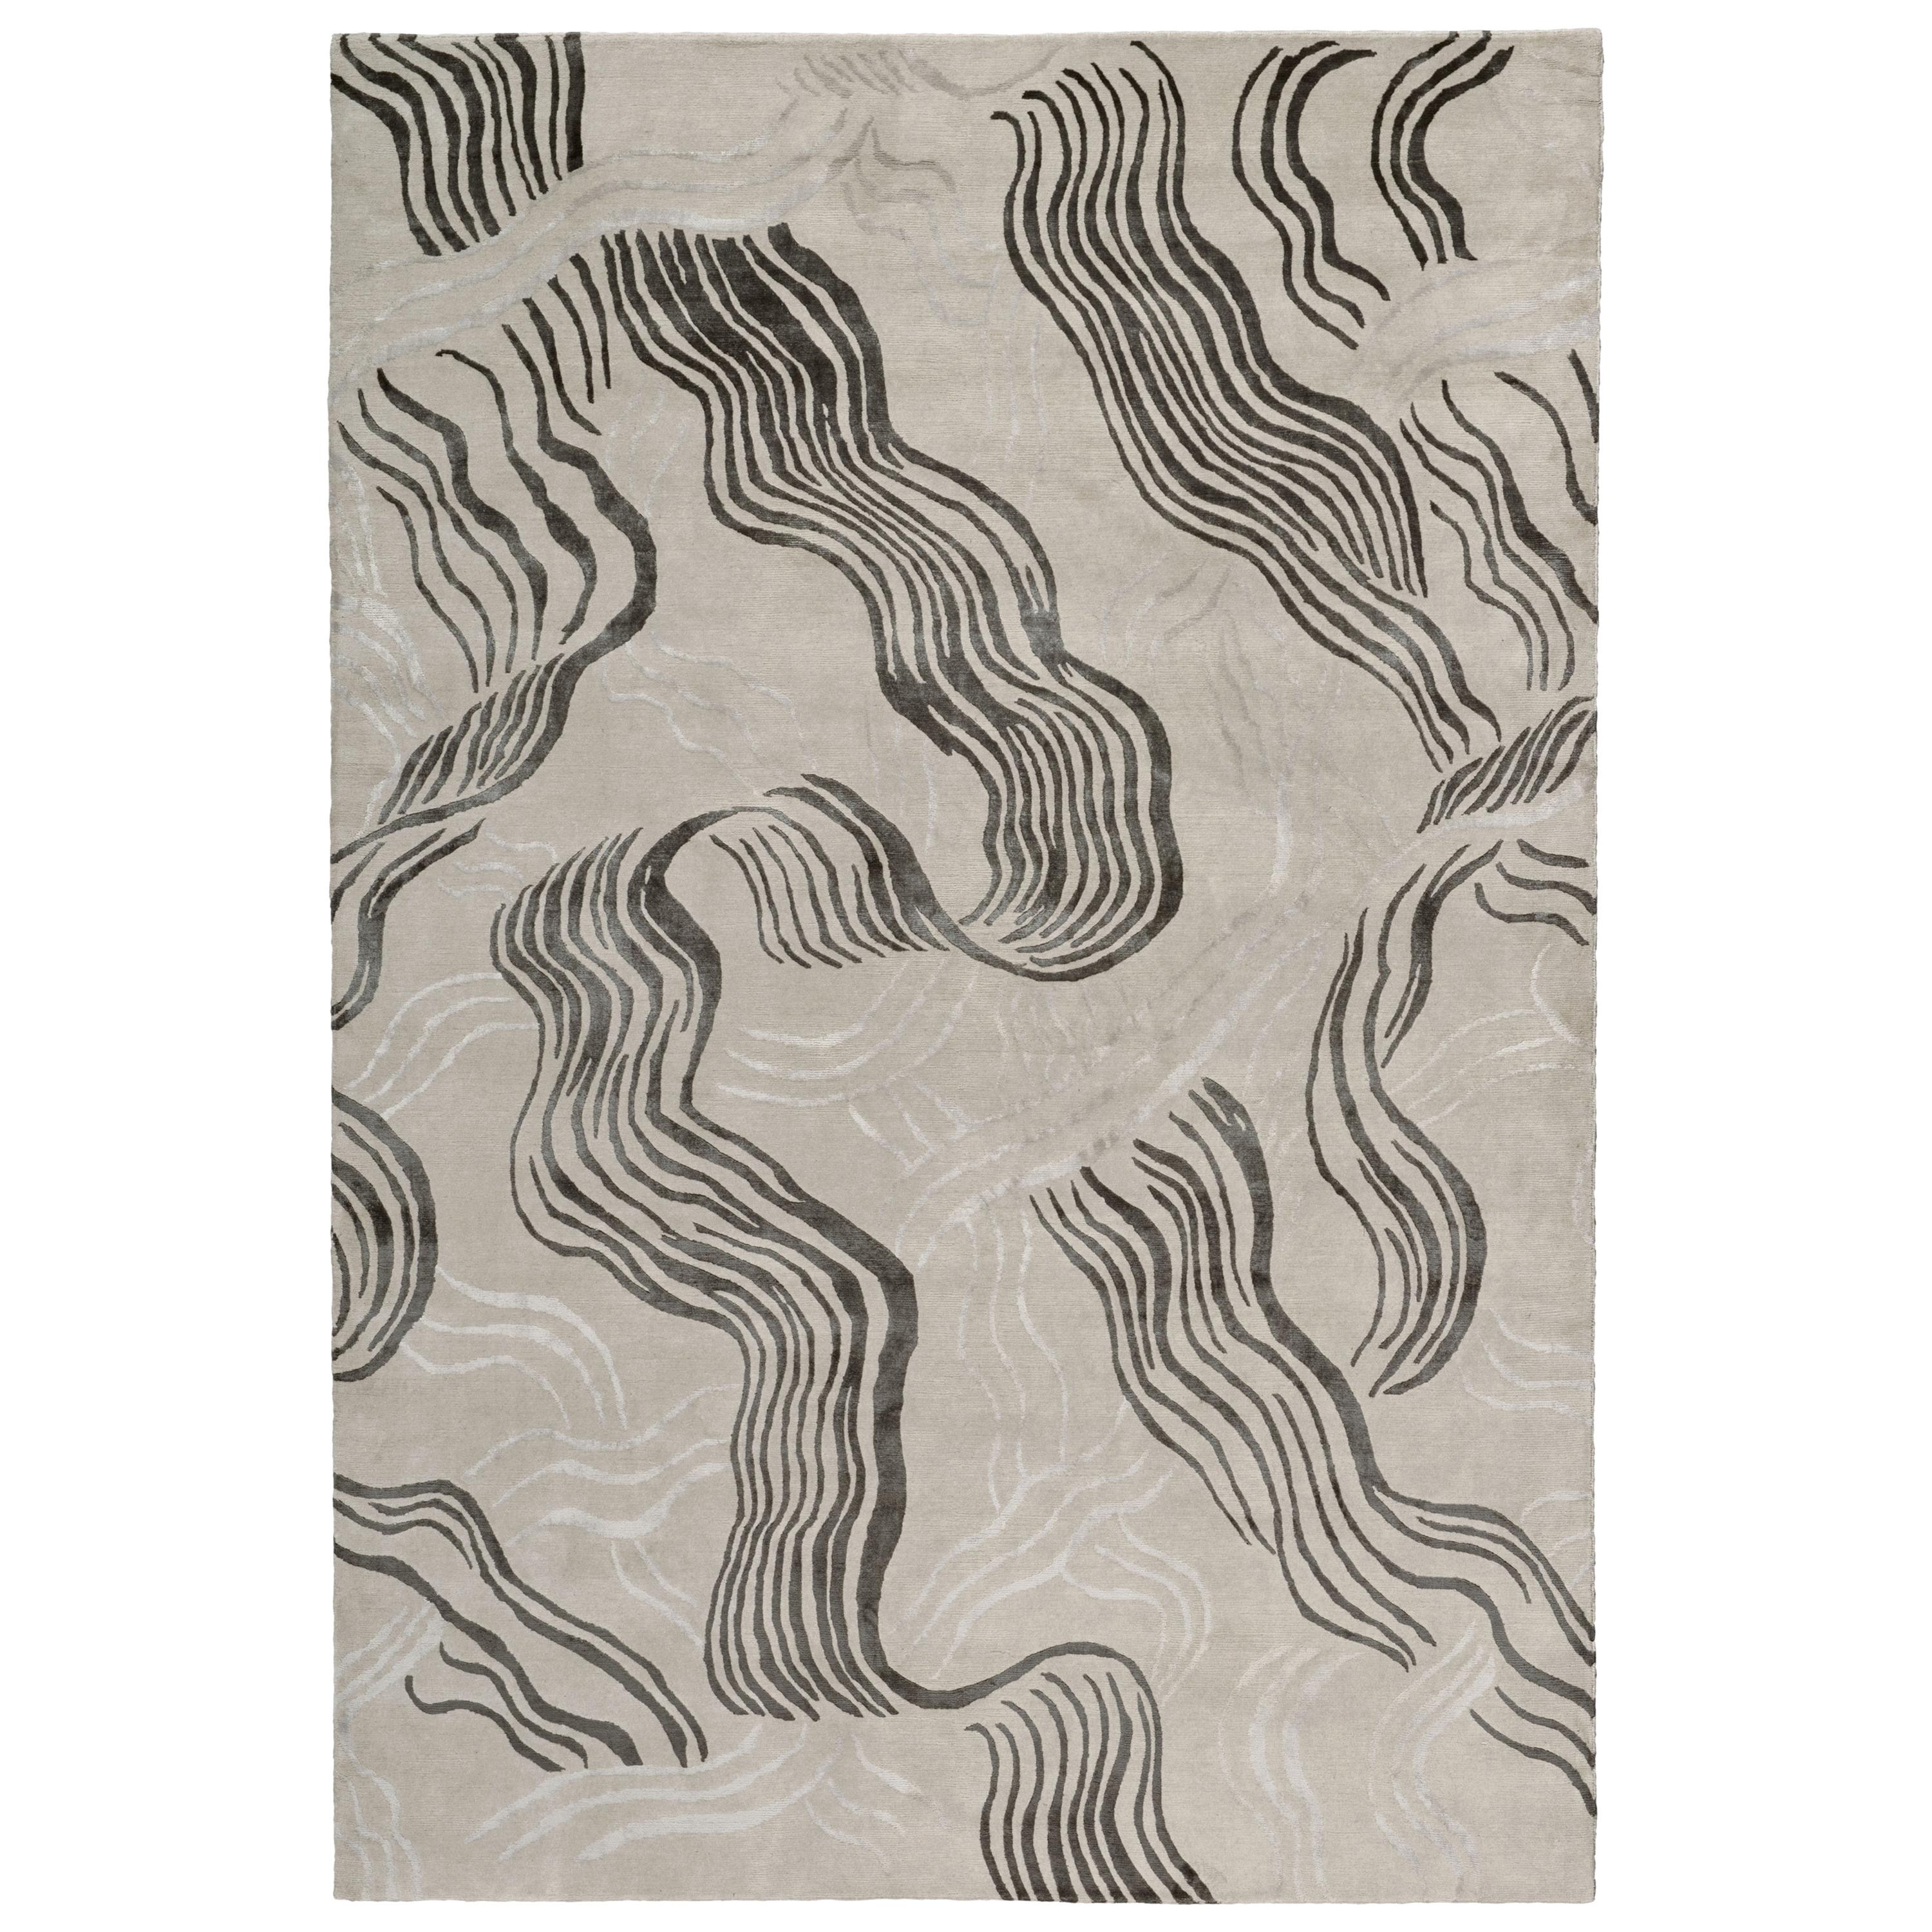 Wake Hand-Knotted 10x8 Rug in Wool and Silk by Kelly Wearstler For Sale